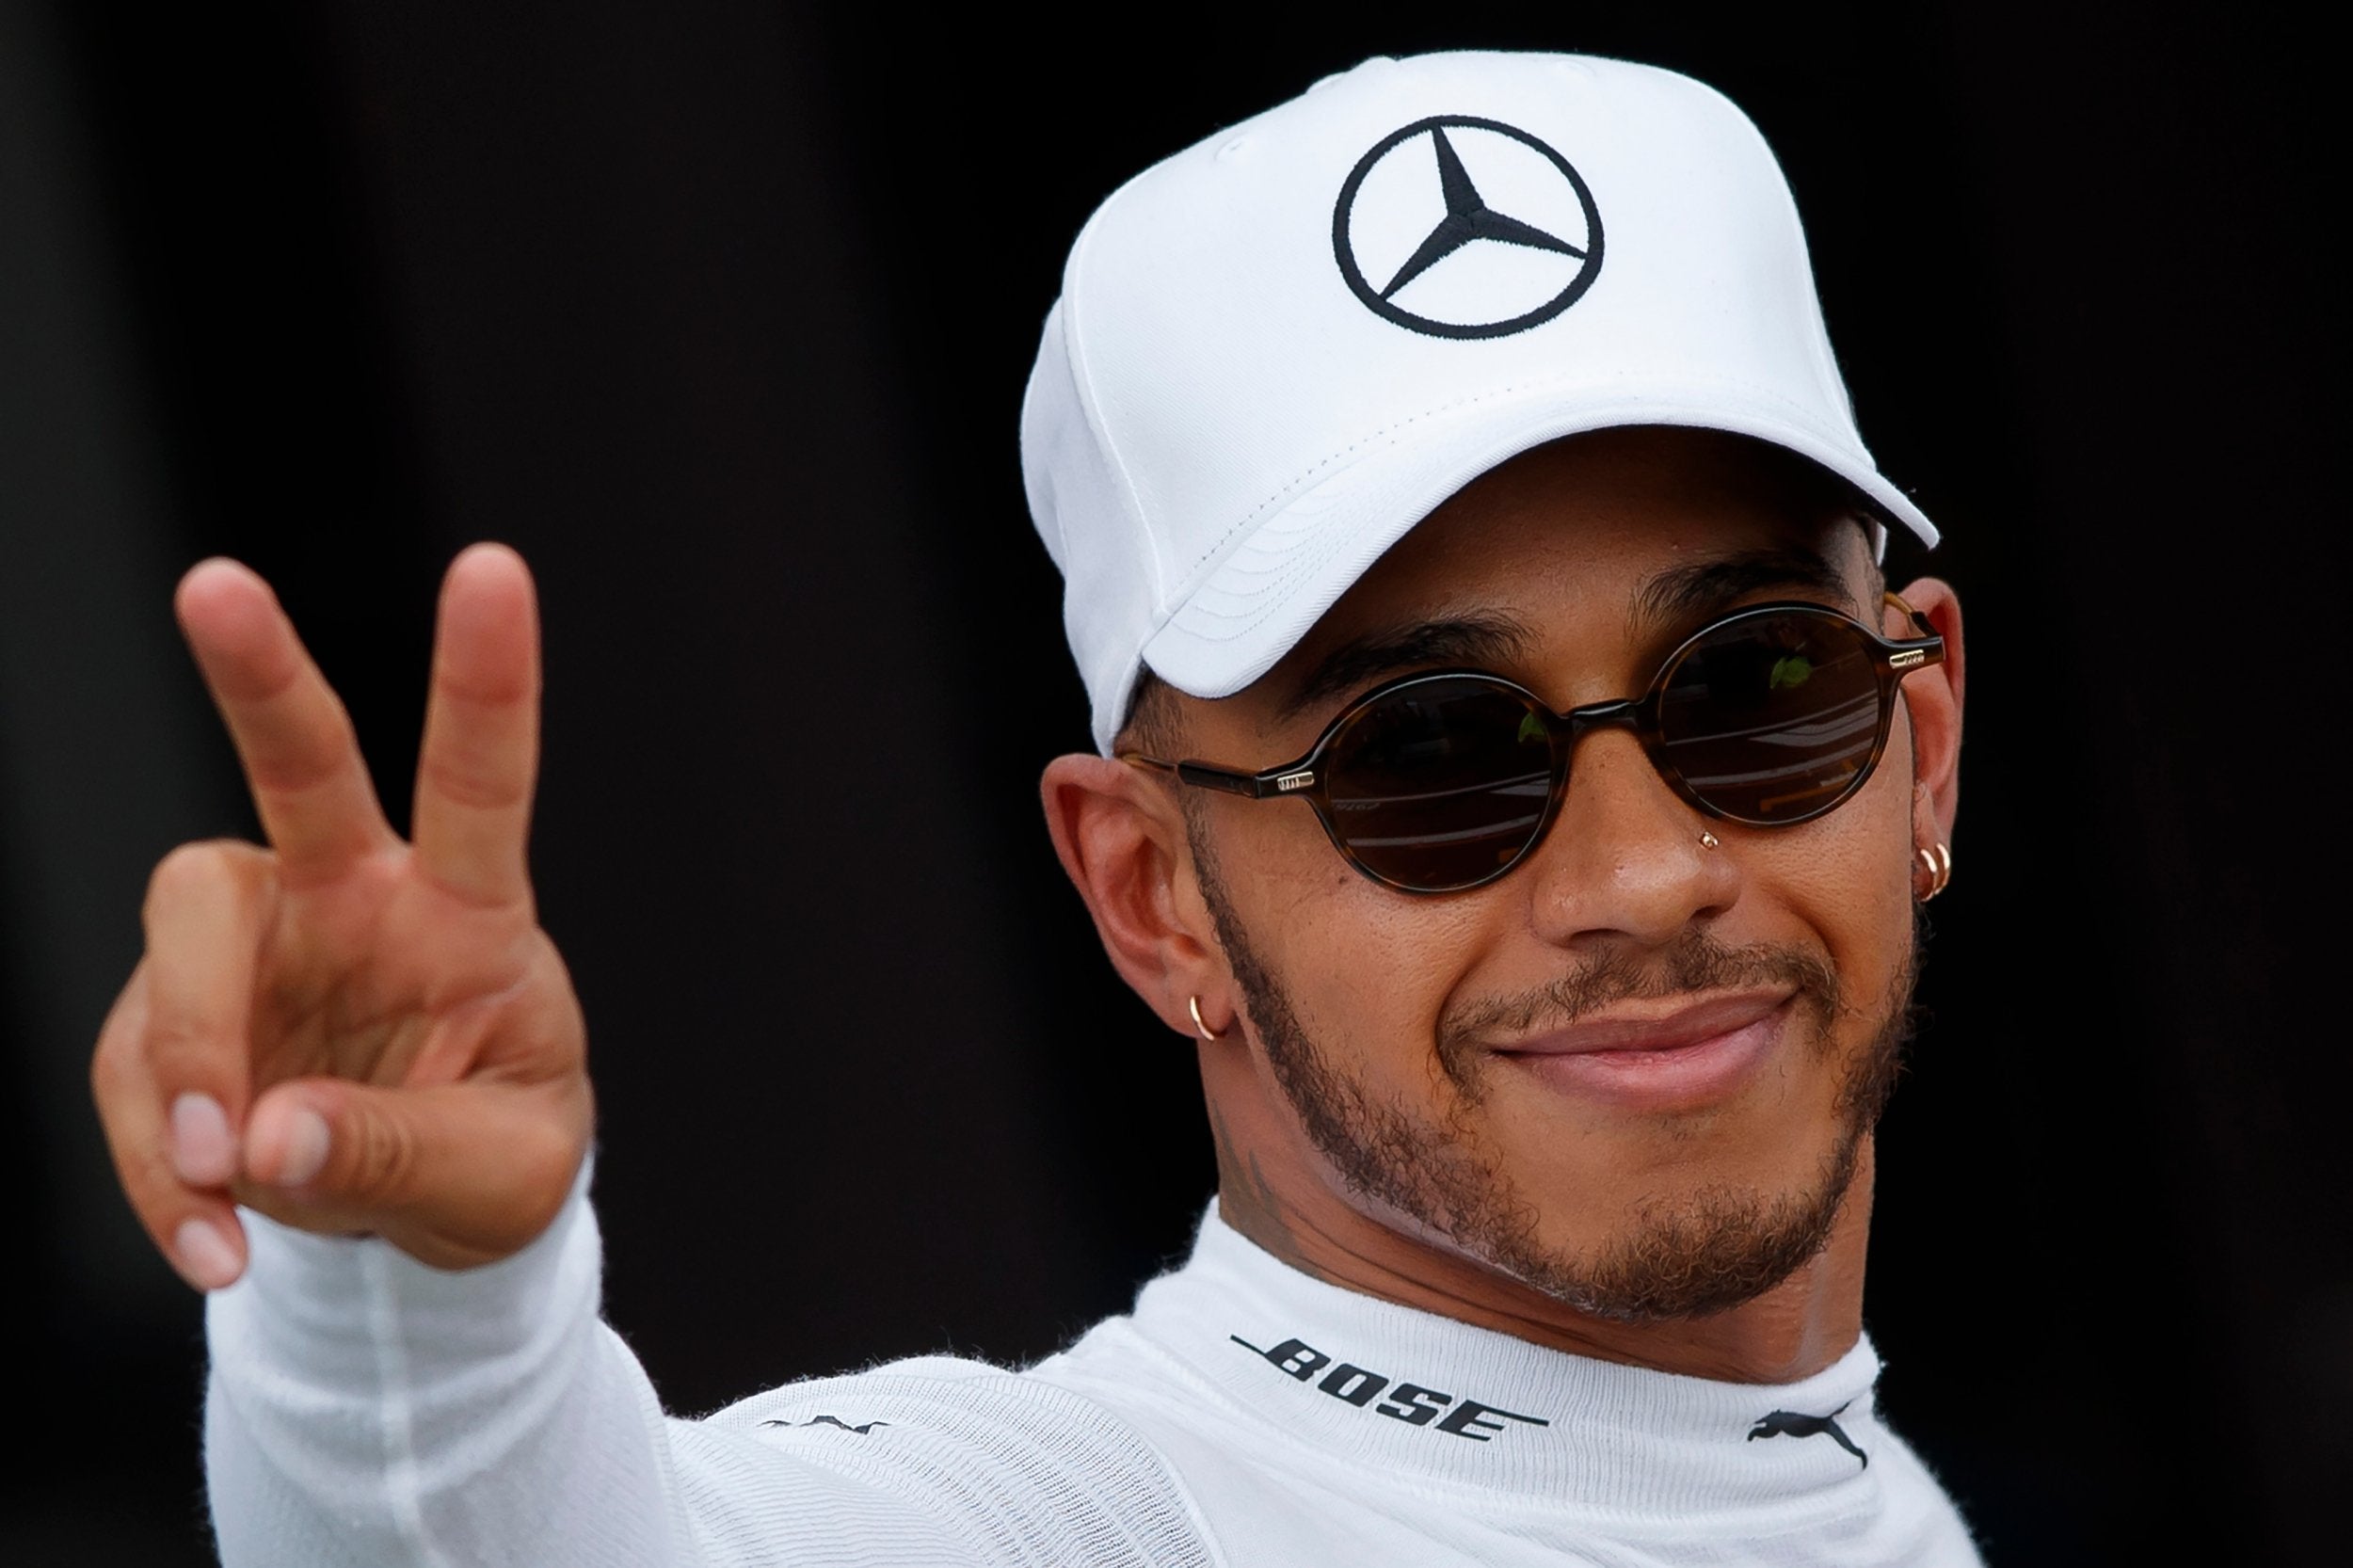 The British driver saw off his rival team-mate Valtteri Bottas by more than one tenth